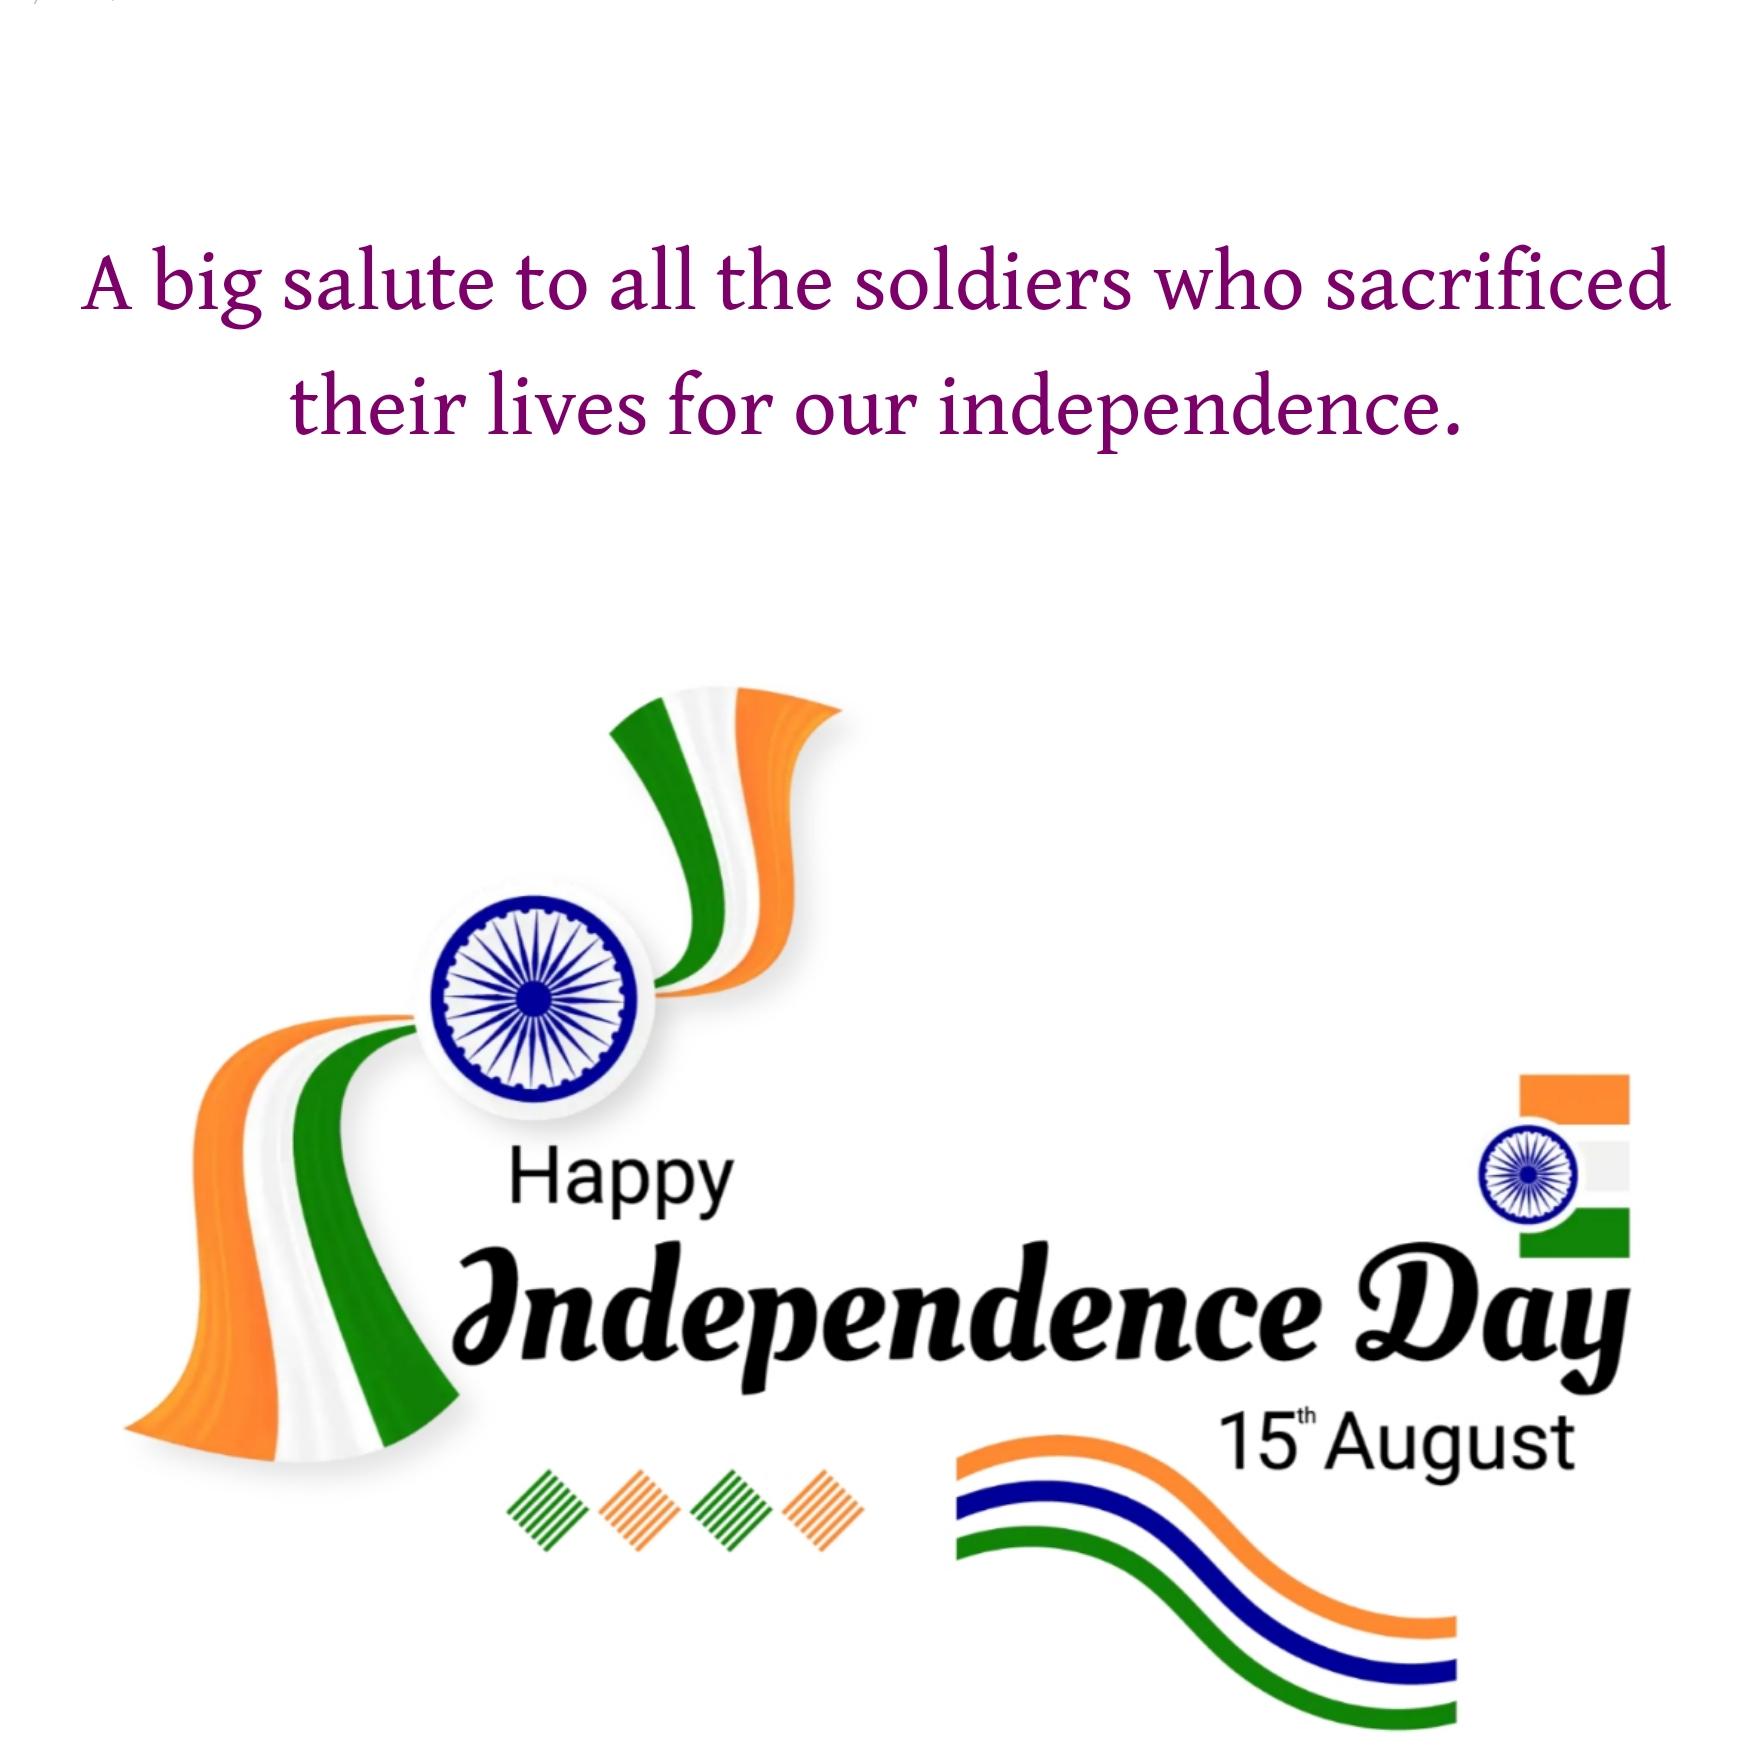 A big salute to all the soldiers who sacrificed their lives